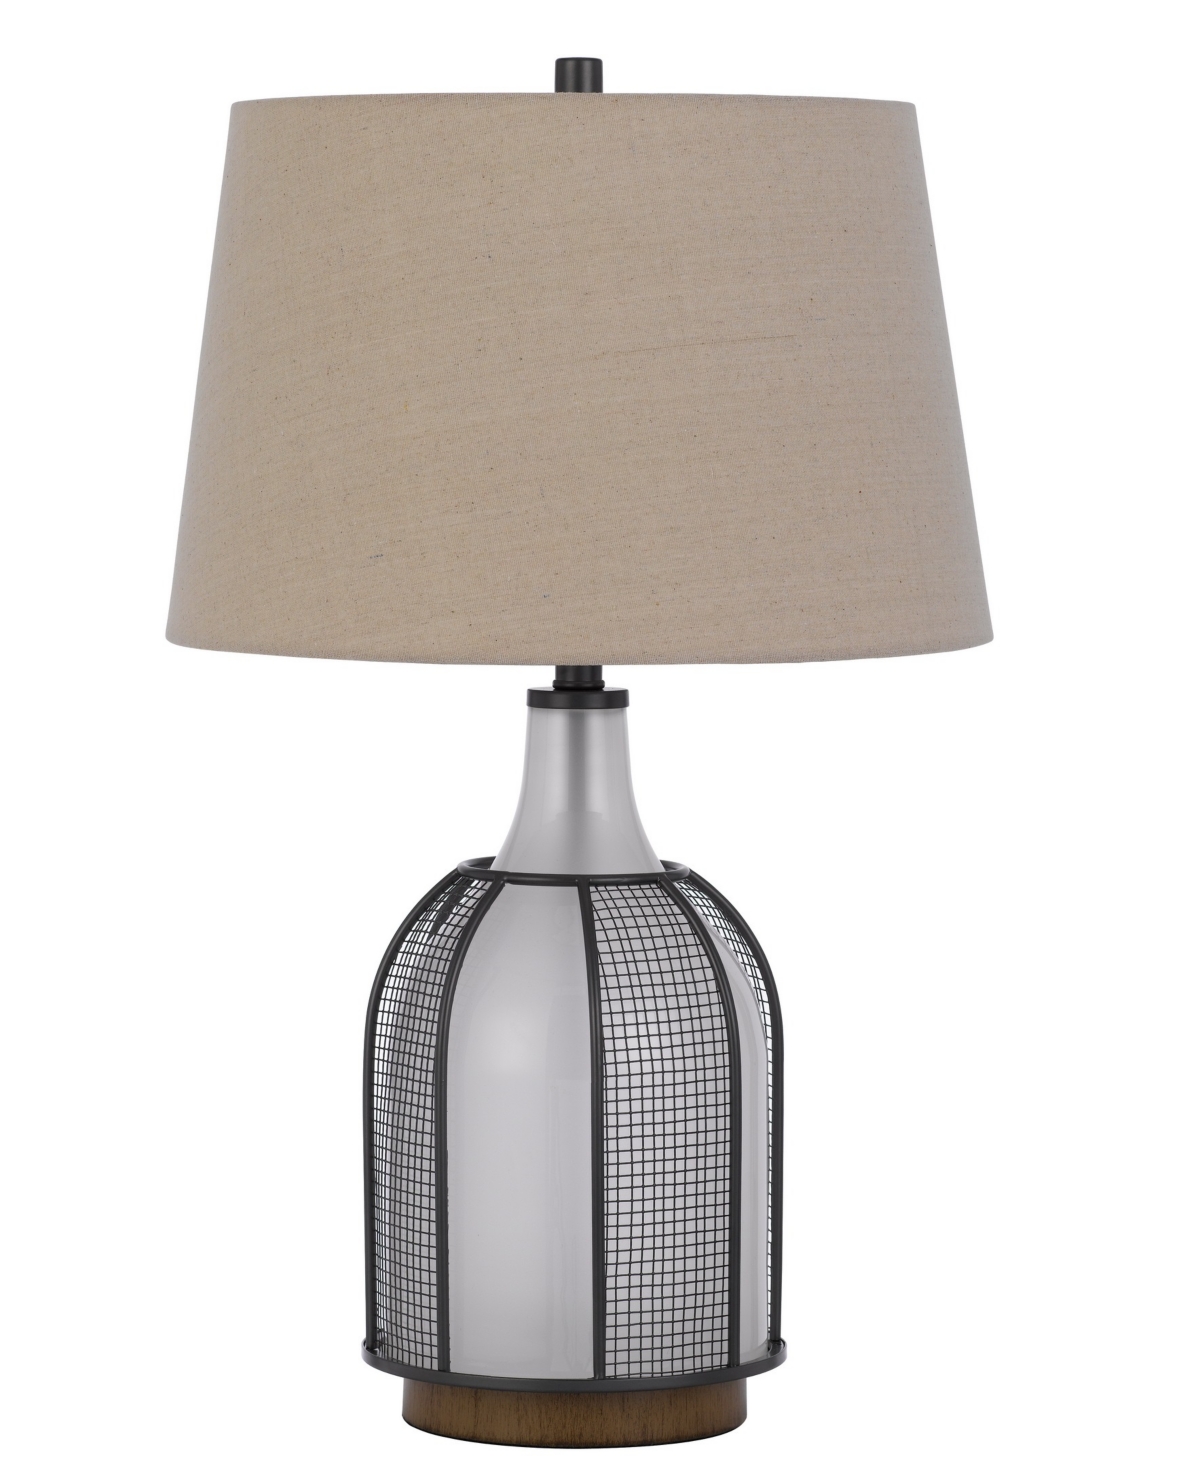 Cal Lighting Morgan 28" Height Table Lamp With Mesh Grill In Frost,black